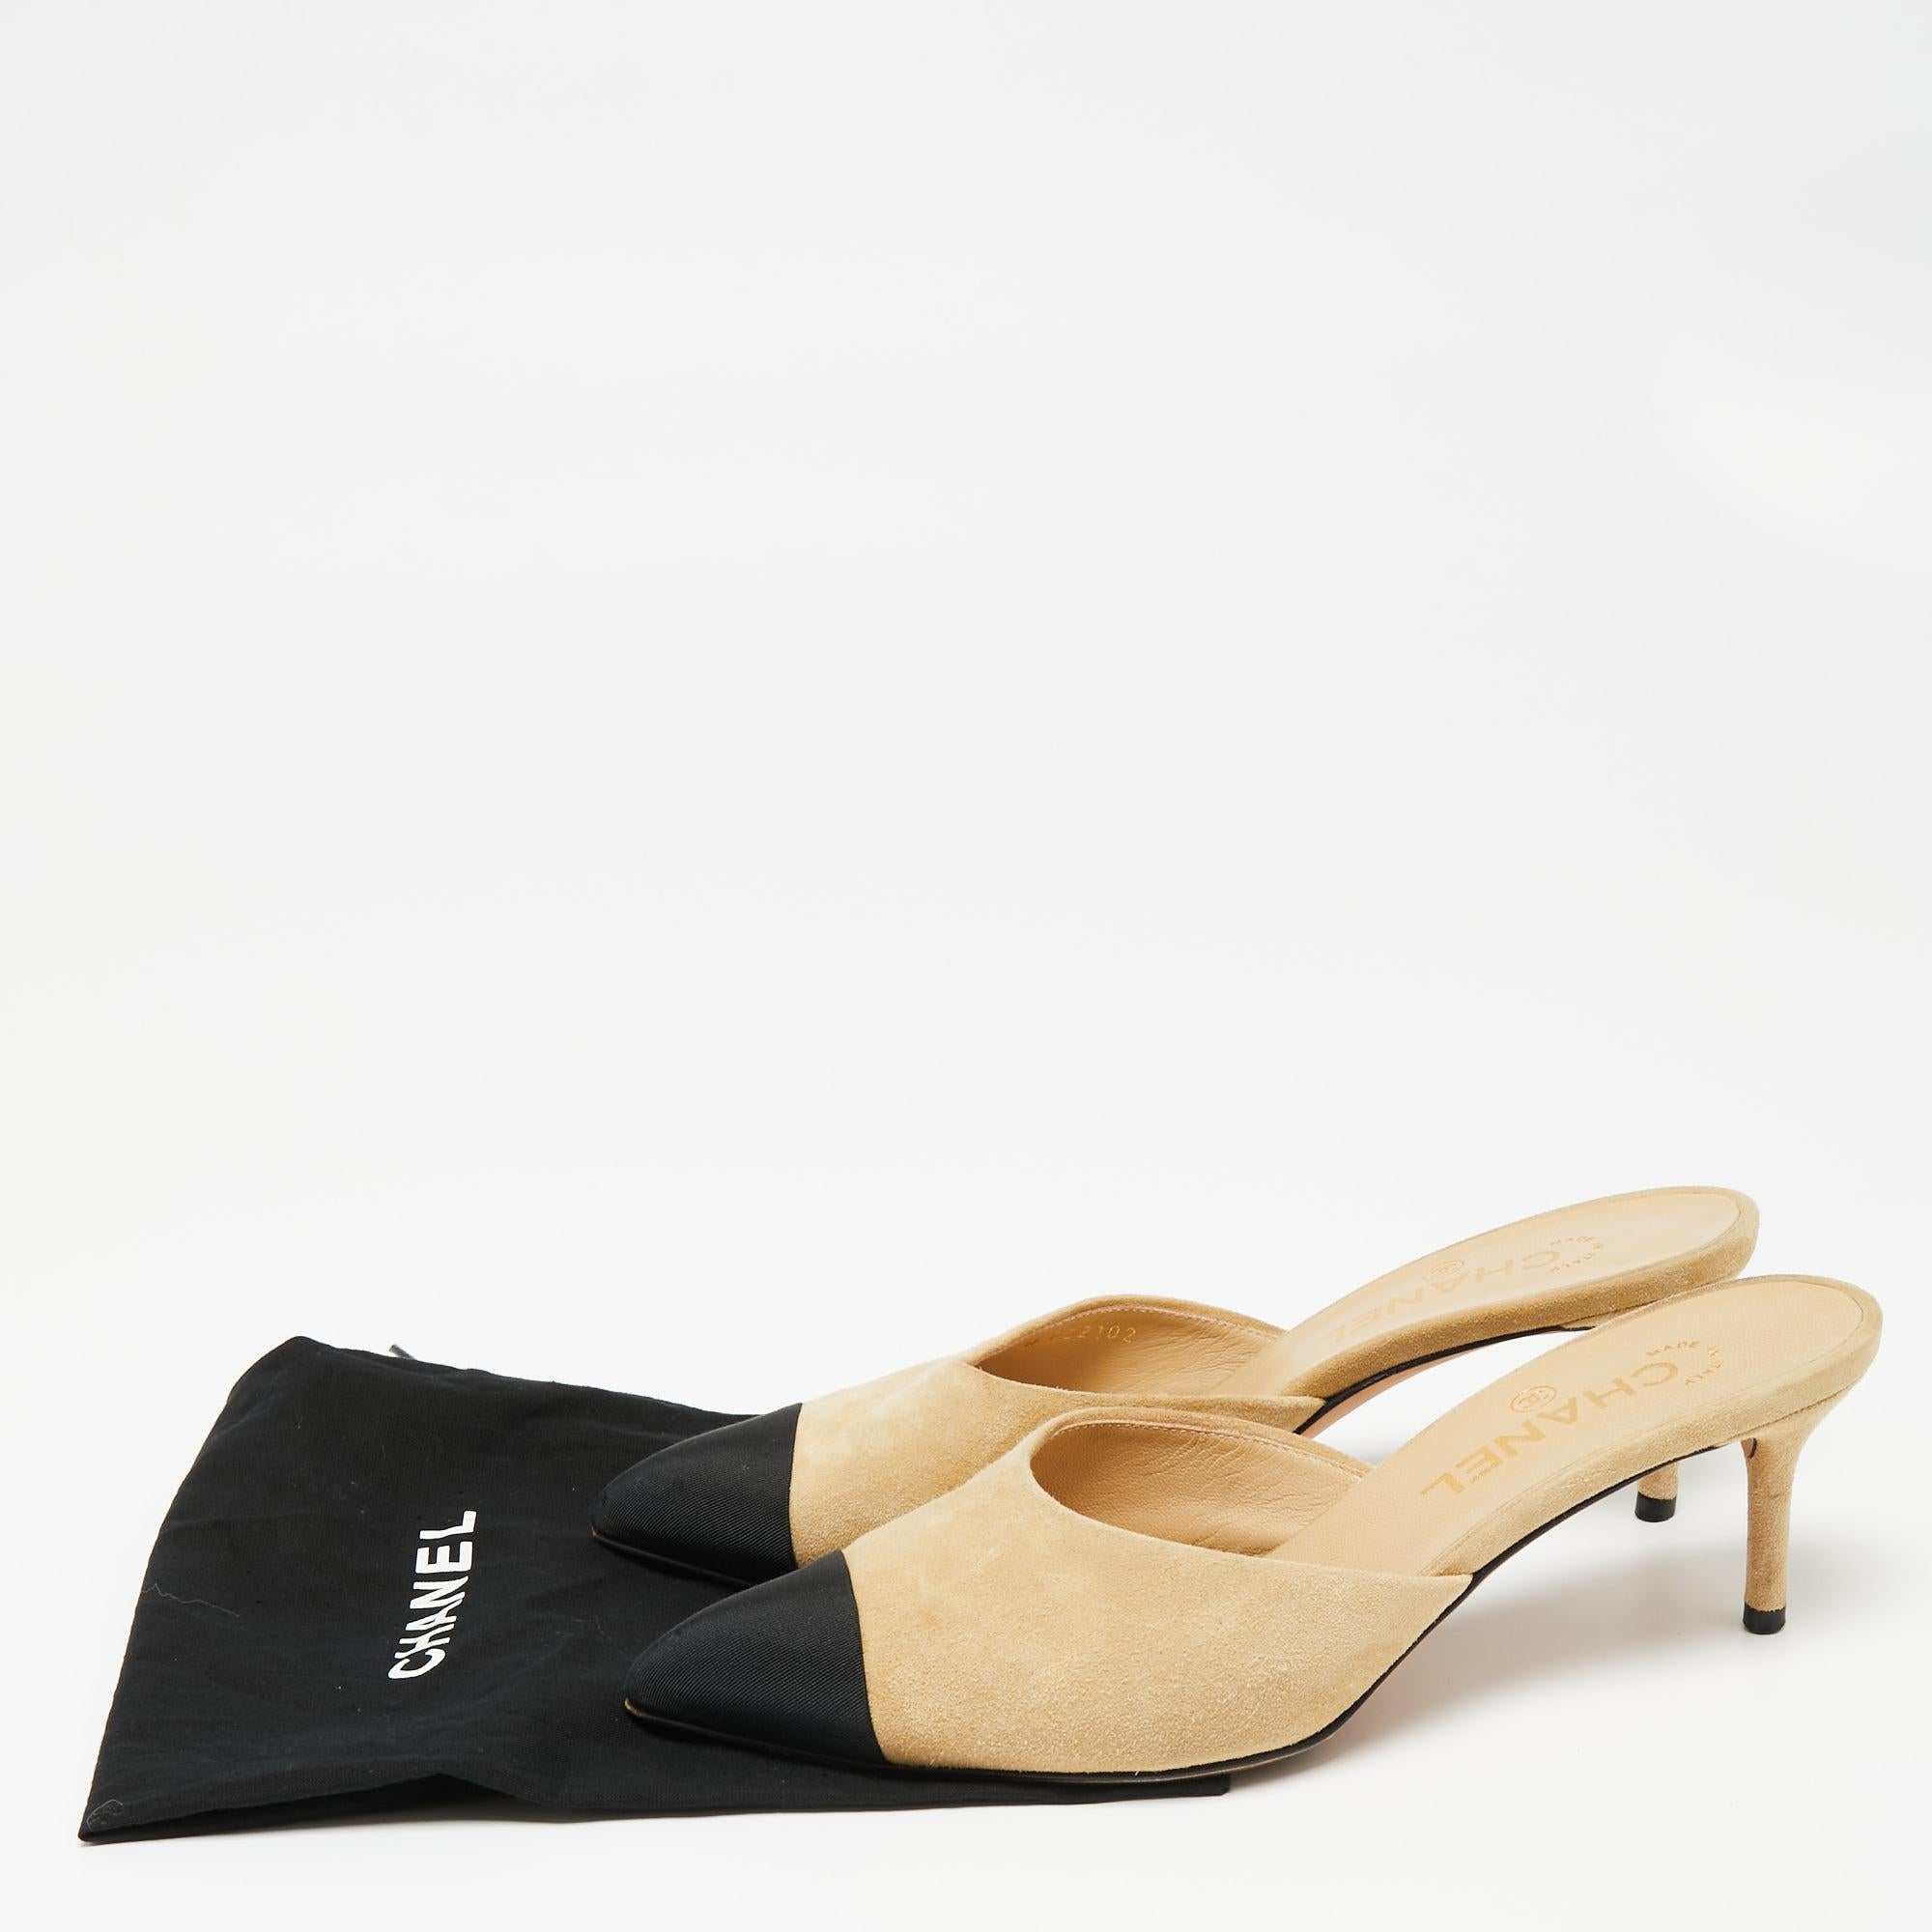 Chanel Beige/Black Suede And Canvas Mule Sandals Size 38 3